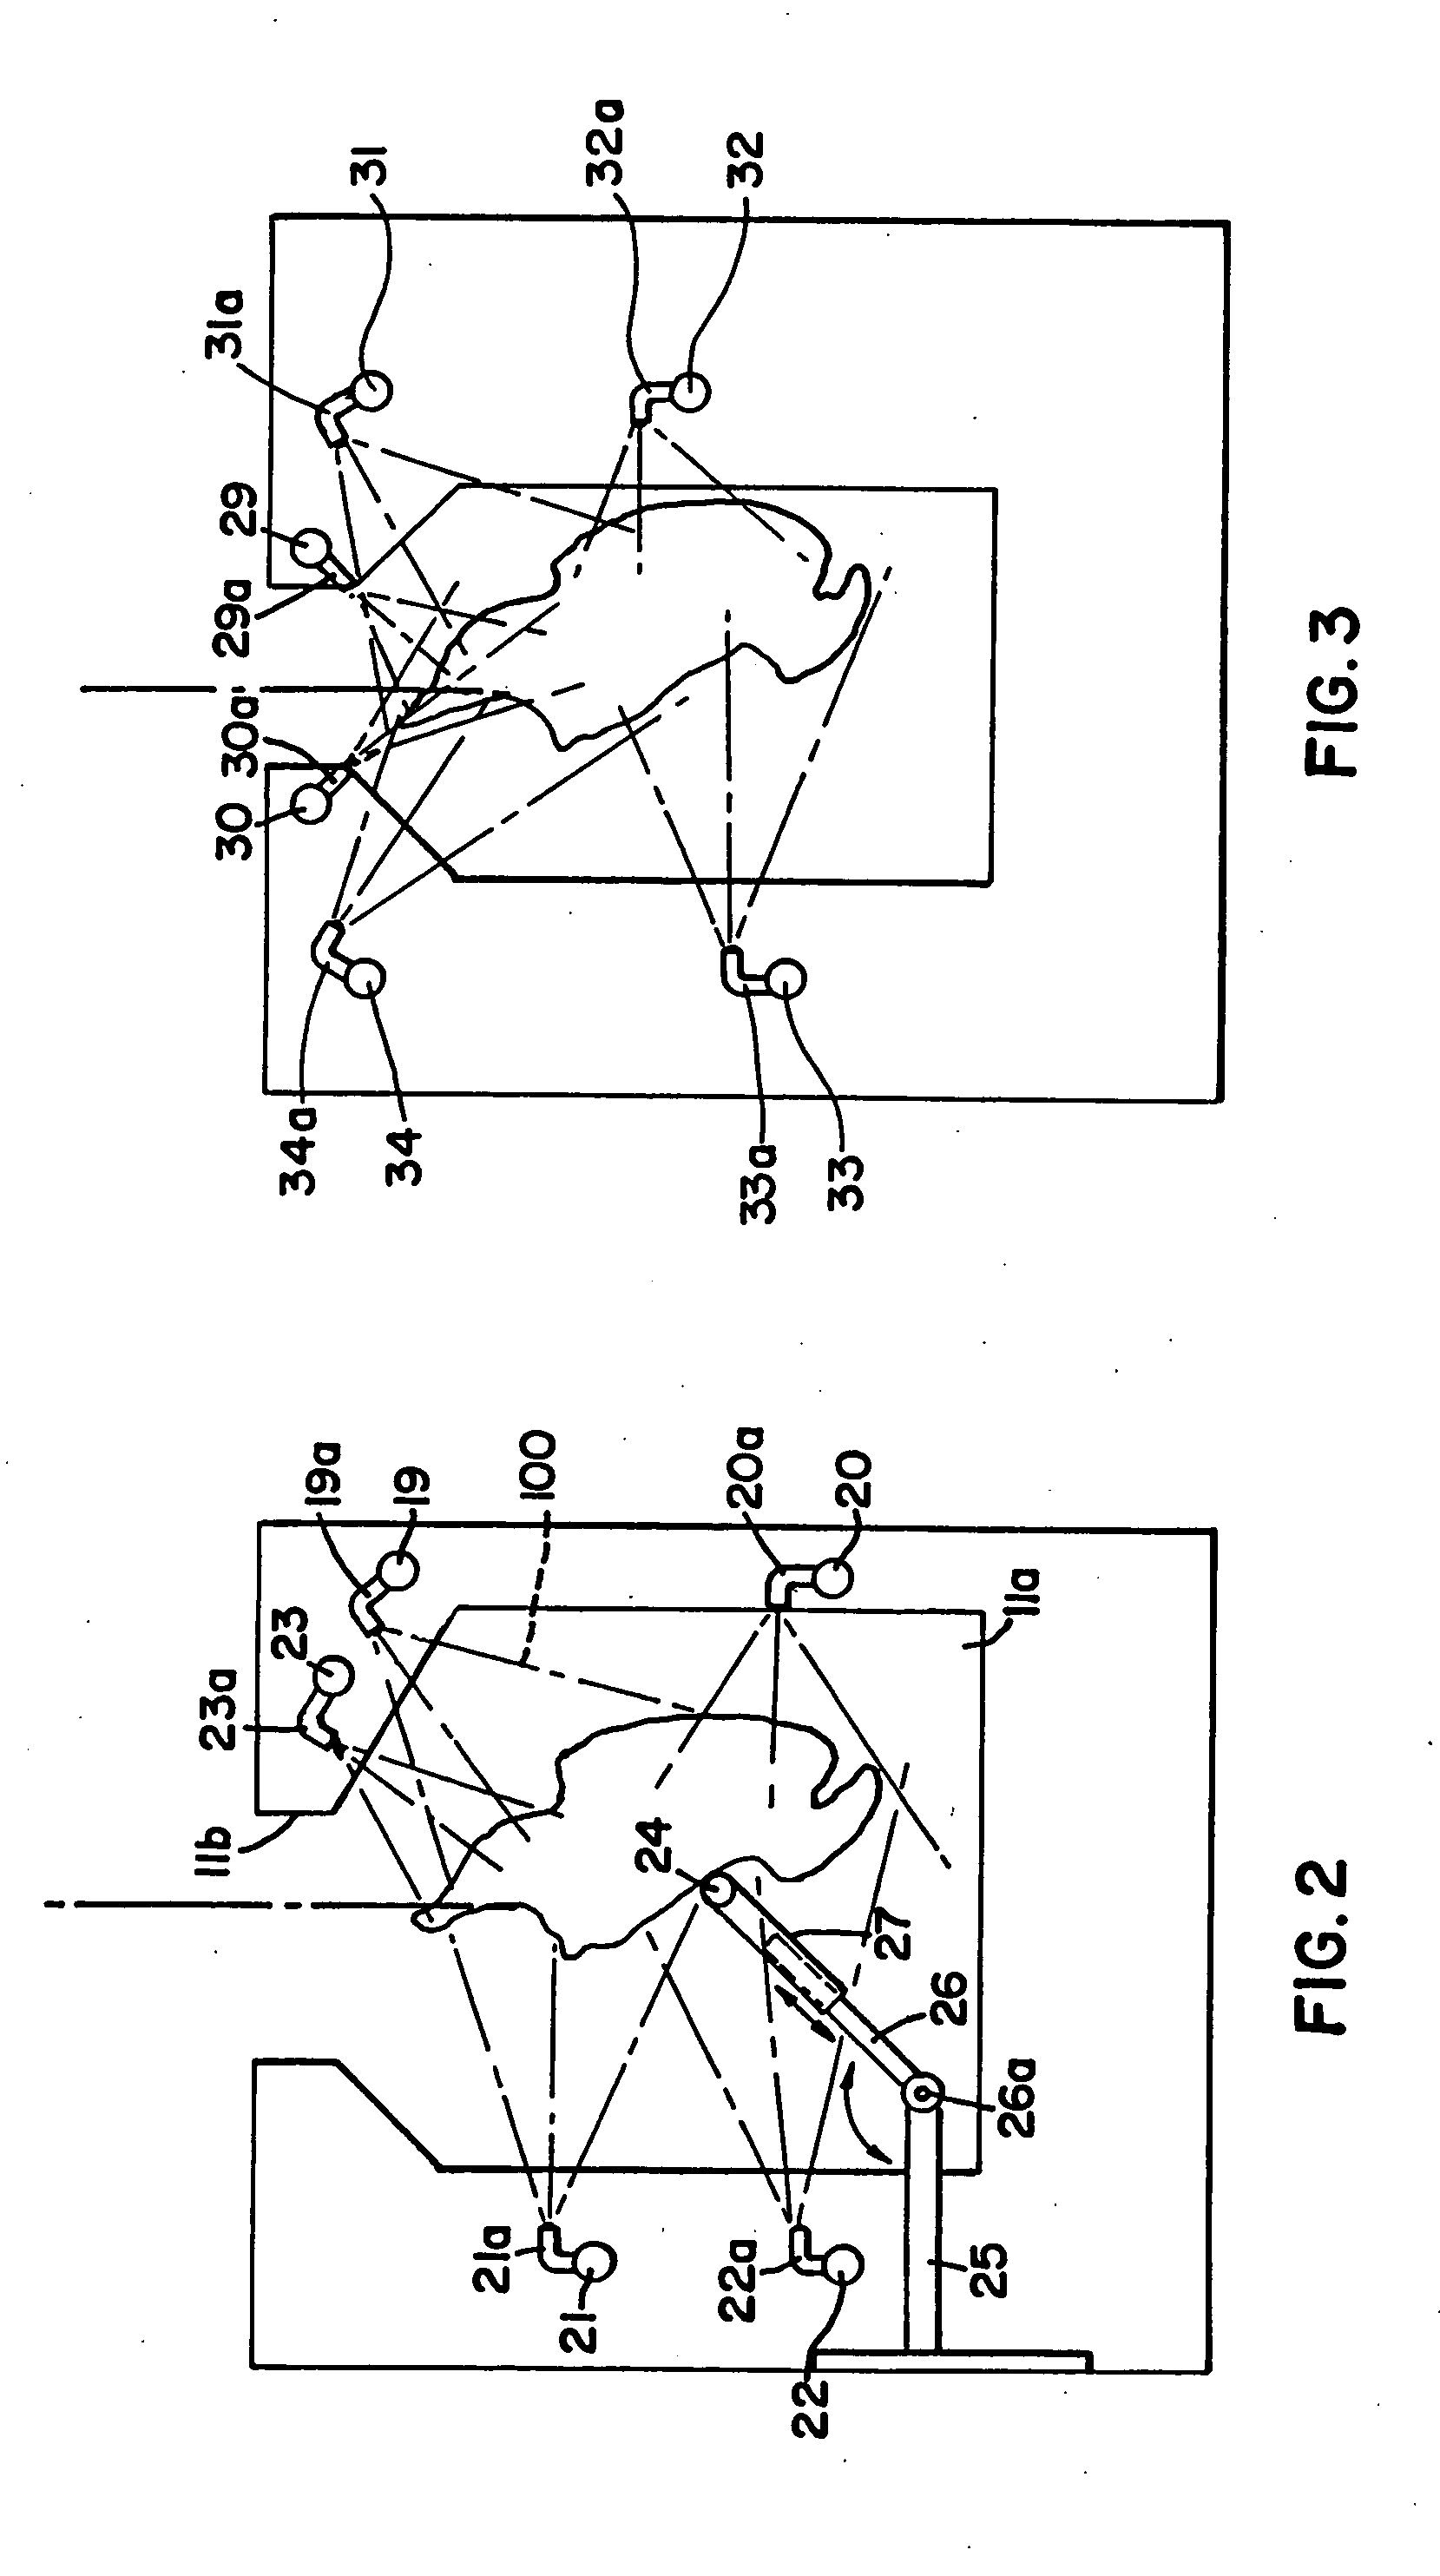 Apparatus and method for cleaning poultry